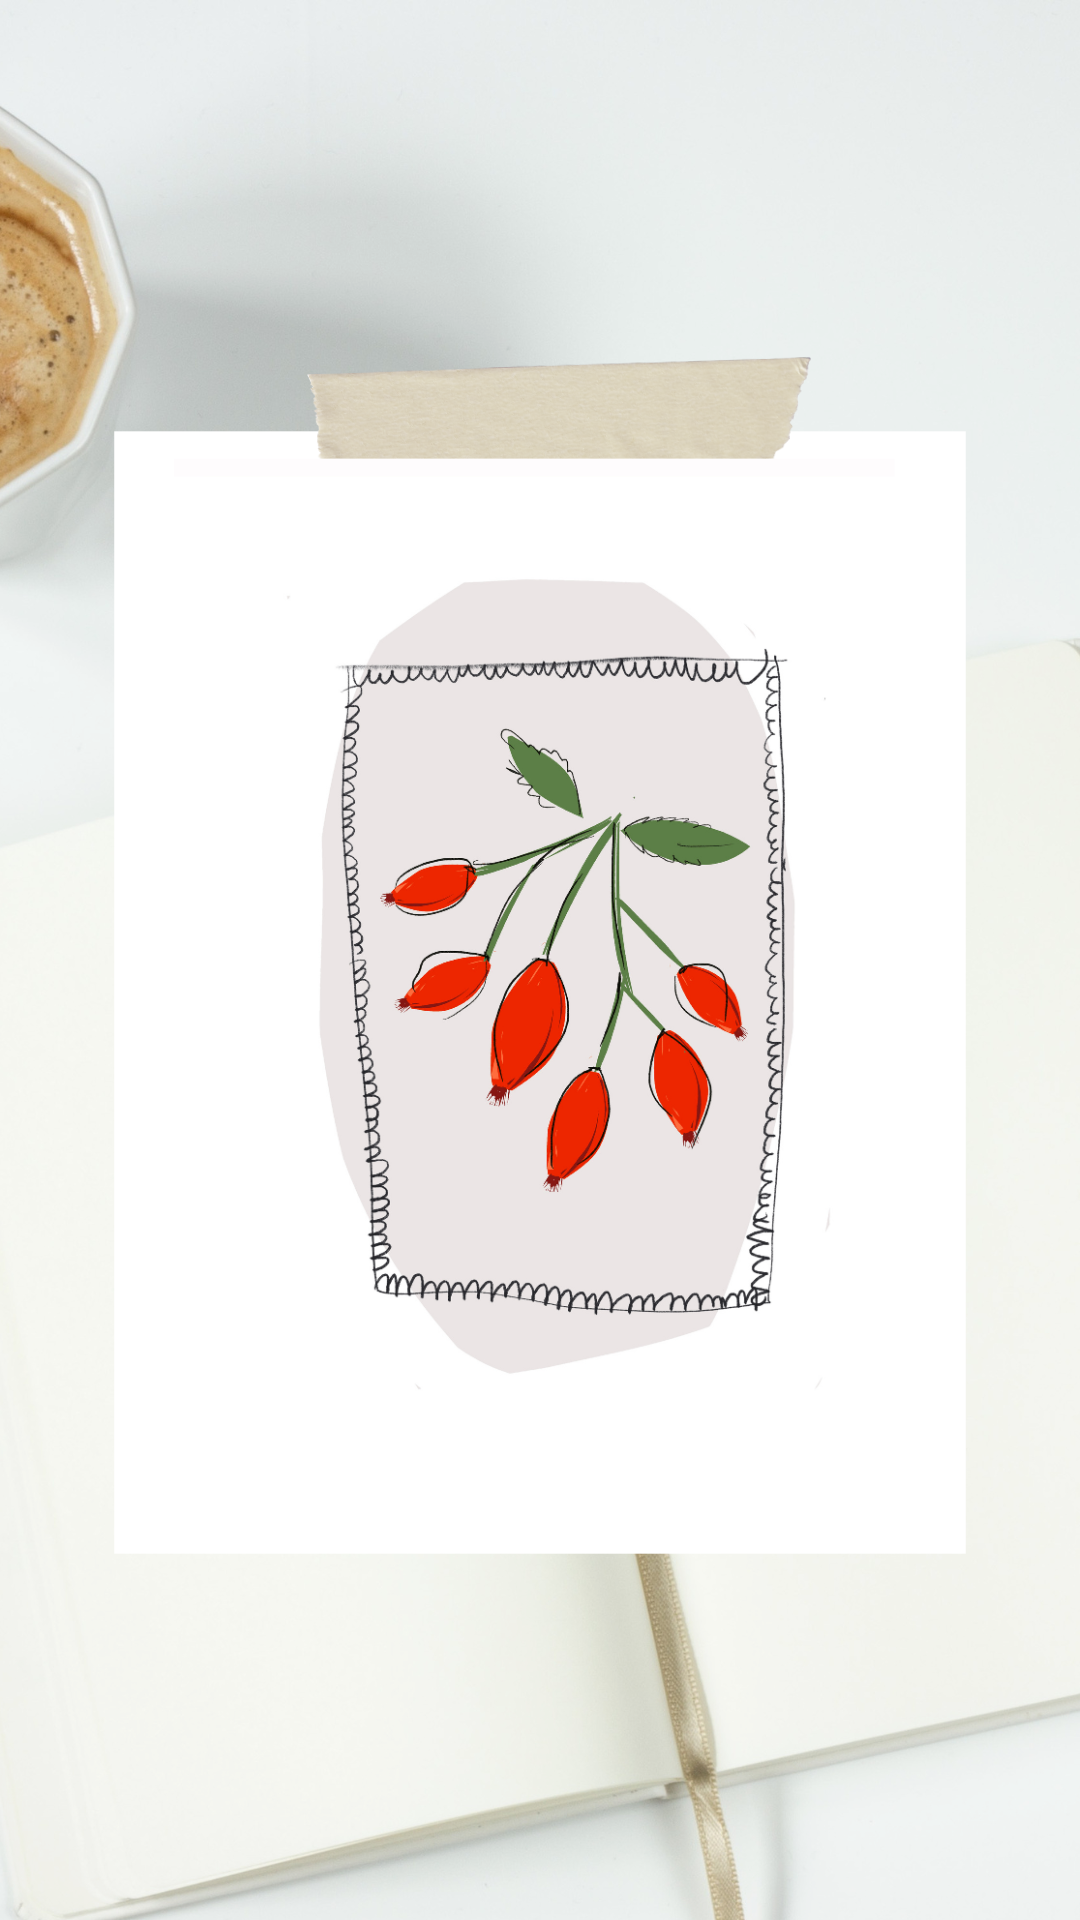 DOWNLOAD AND PRINT YOUR OWN RECIPE CARD - ROSE HIP TEA